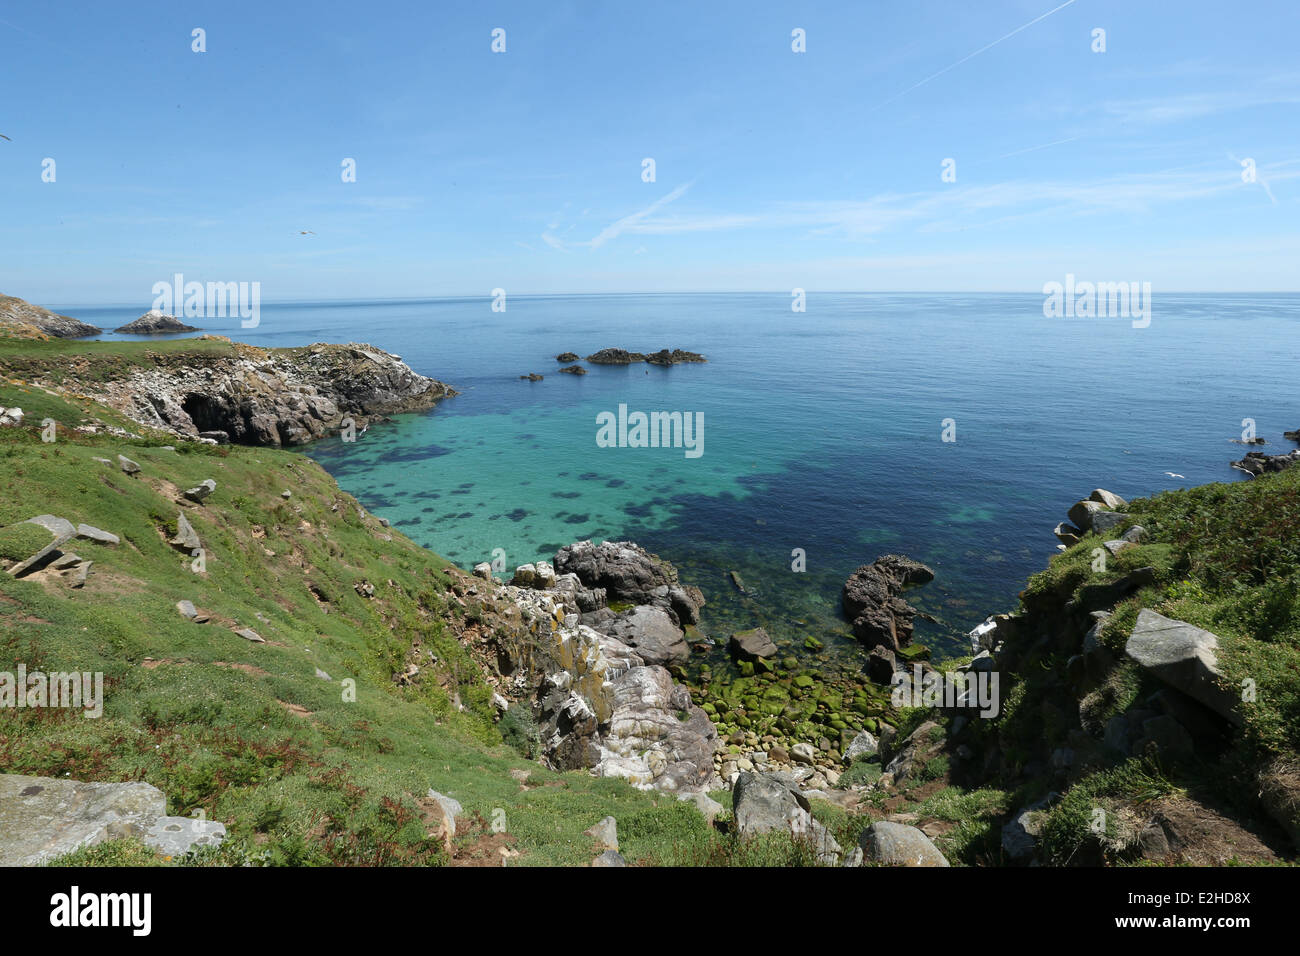 A view of the Celtic Sea from Great Saltee Island in Wexford, Ireland. Stock Photo